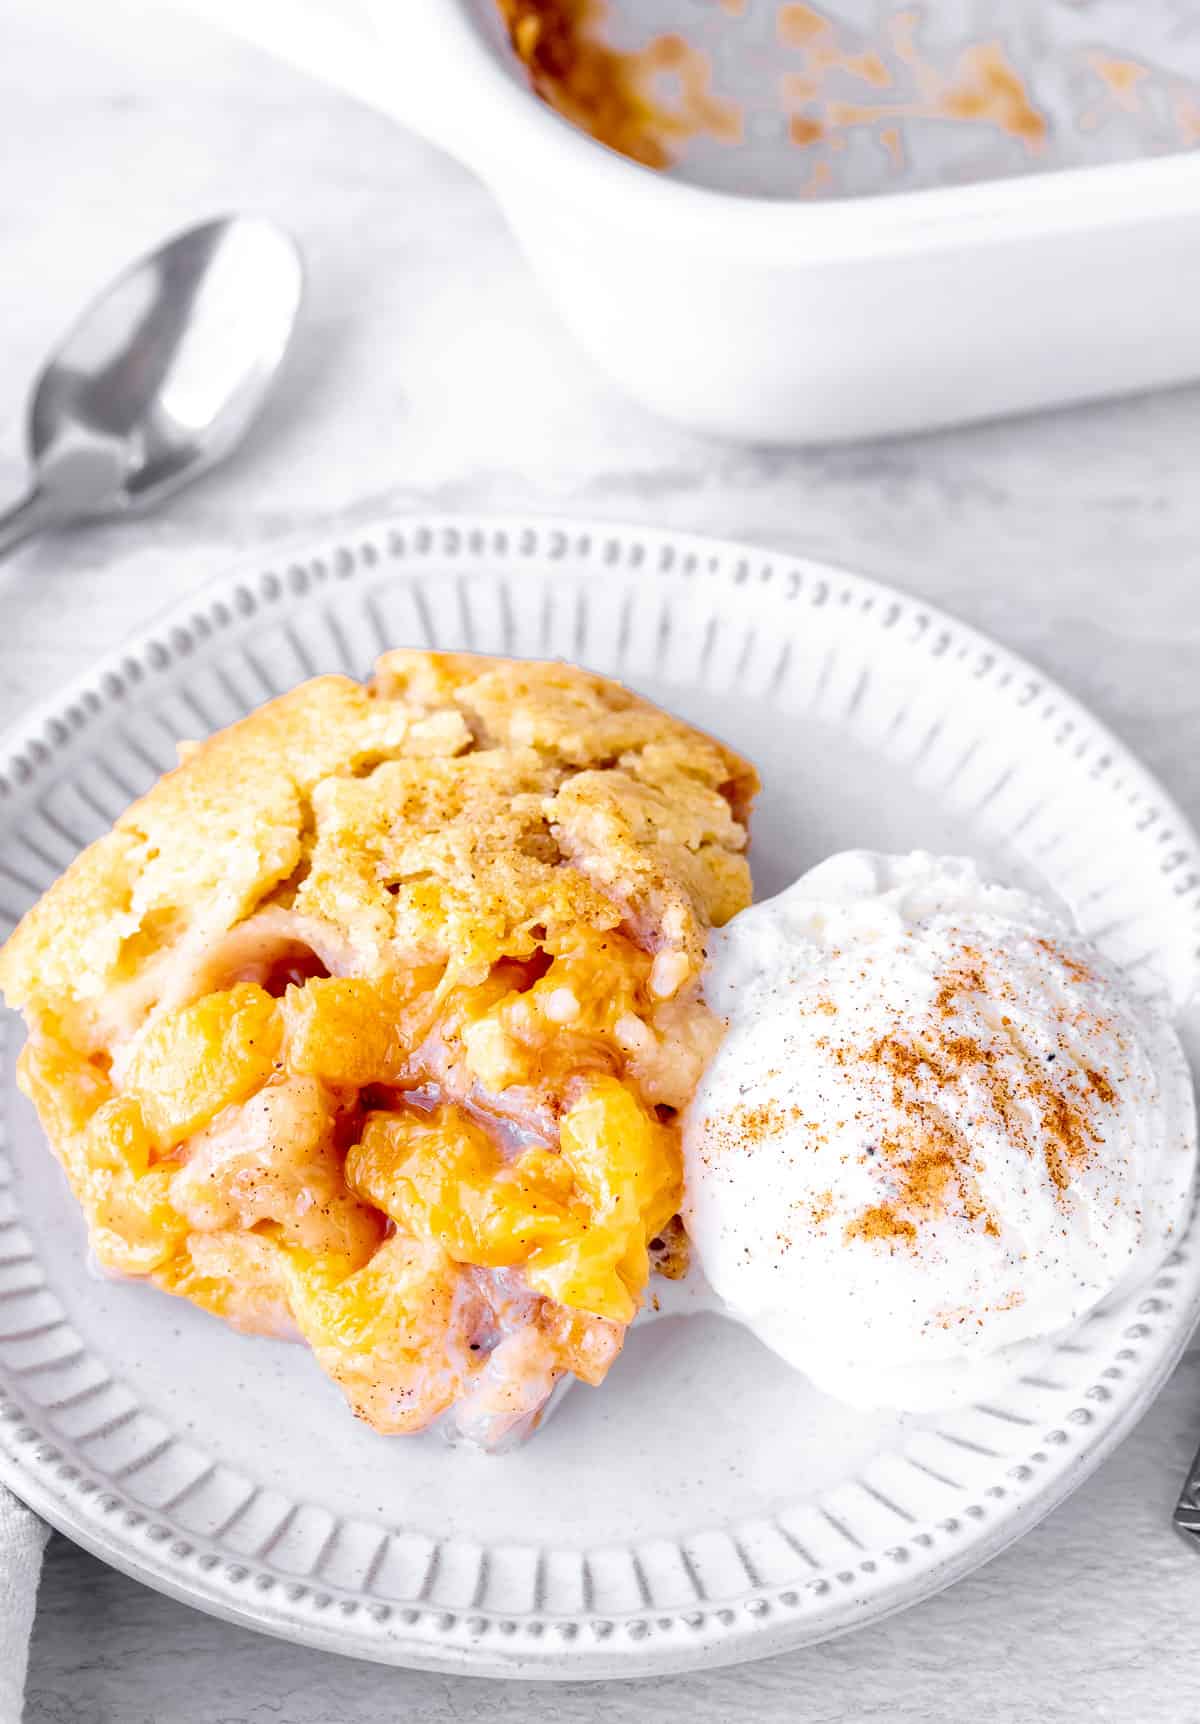 A serving of peach cobbler with vanilla ice cream and the baking dish and a spoon in the background